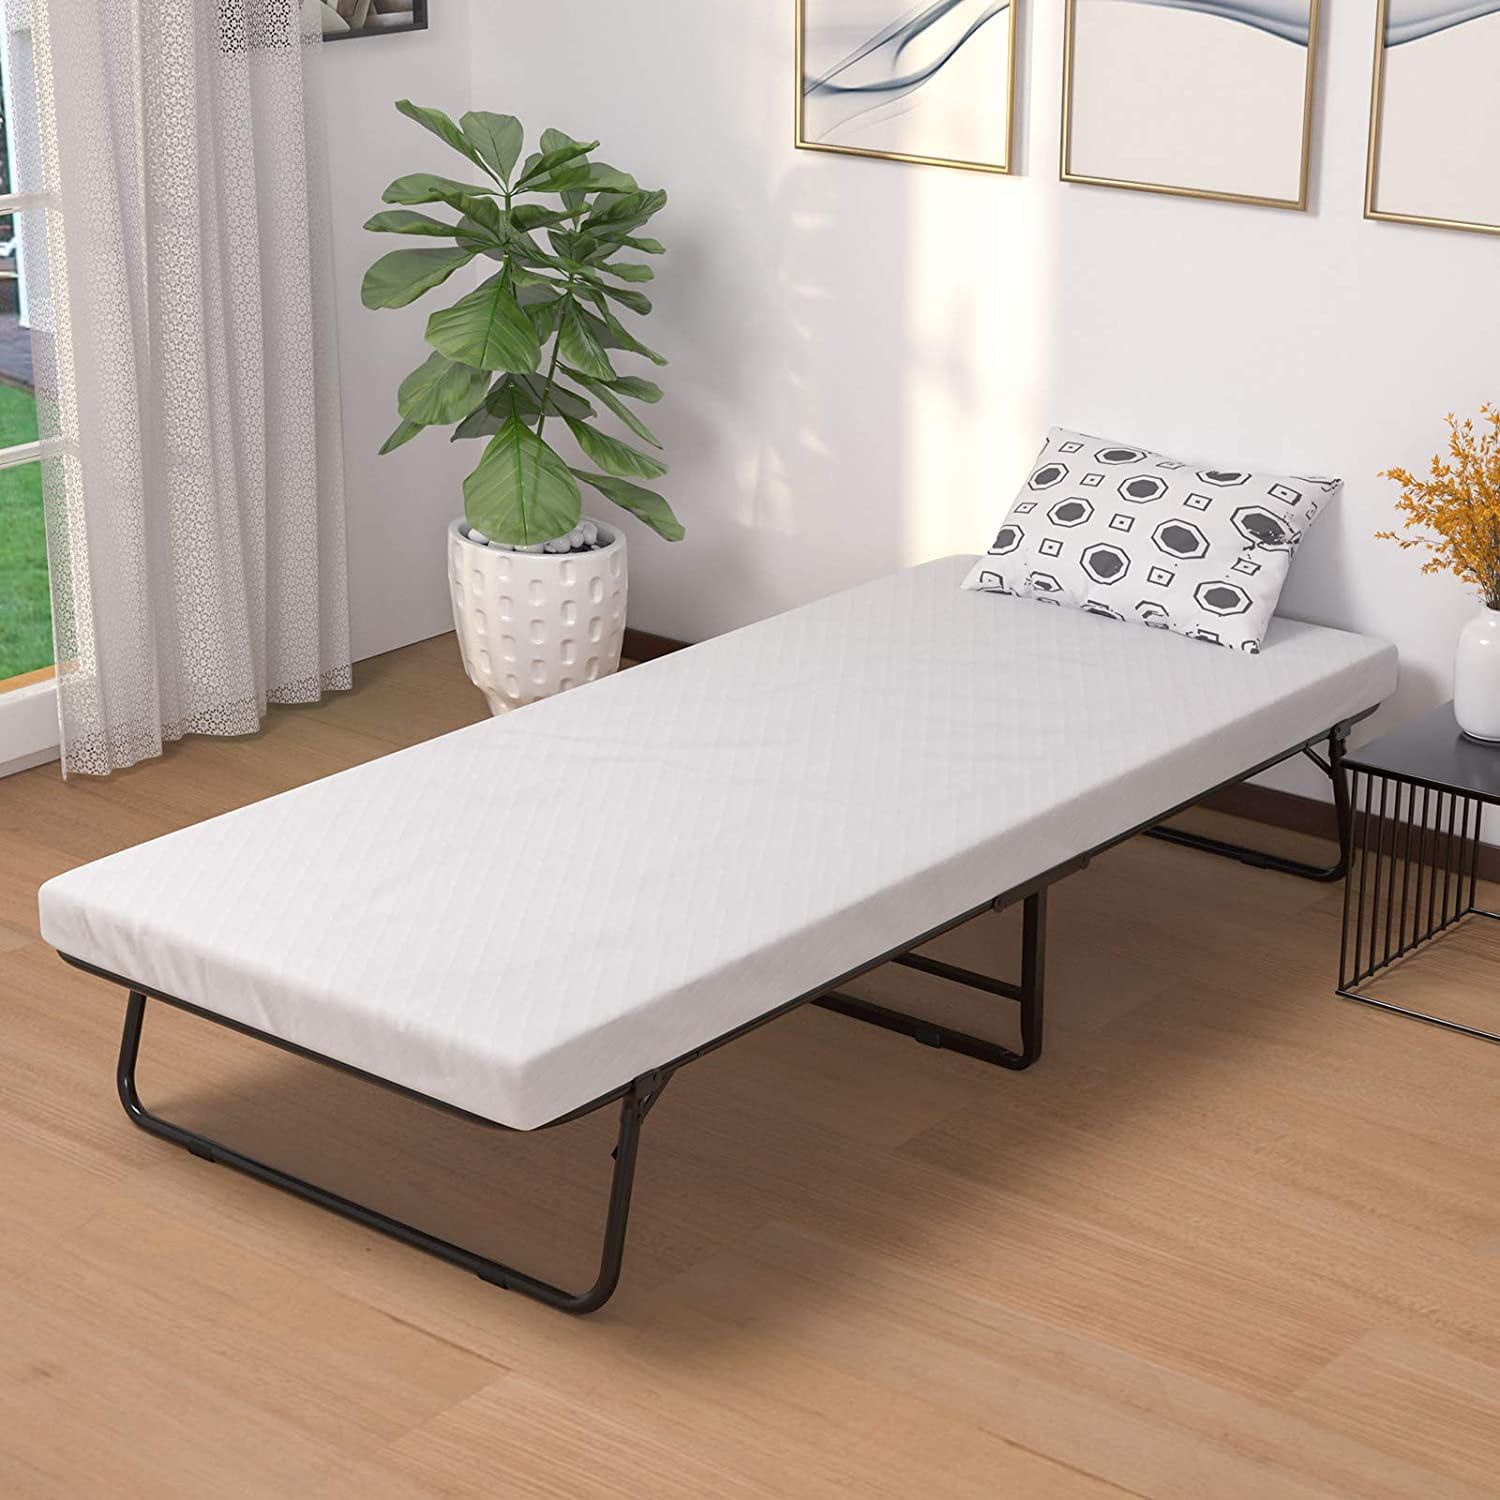 mecor Folding Bed with Foam Mattress/Rollaway Guest Bed with Strong